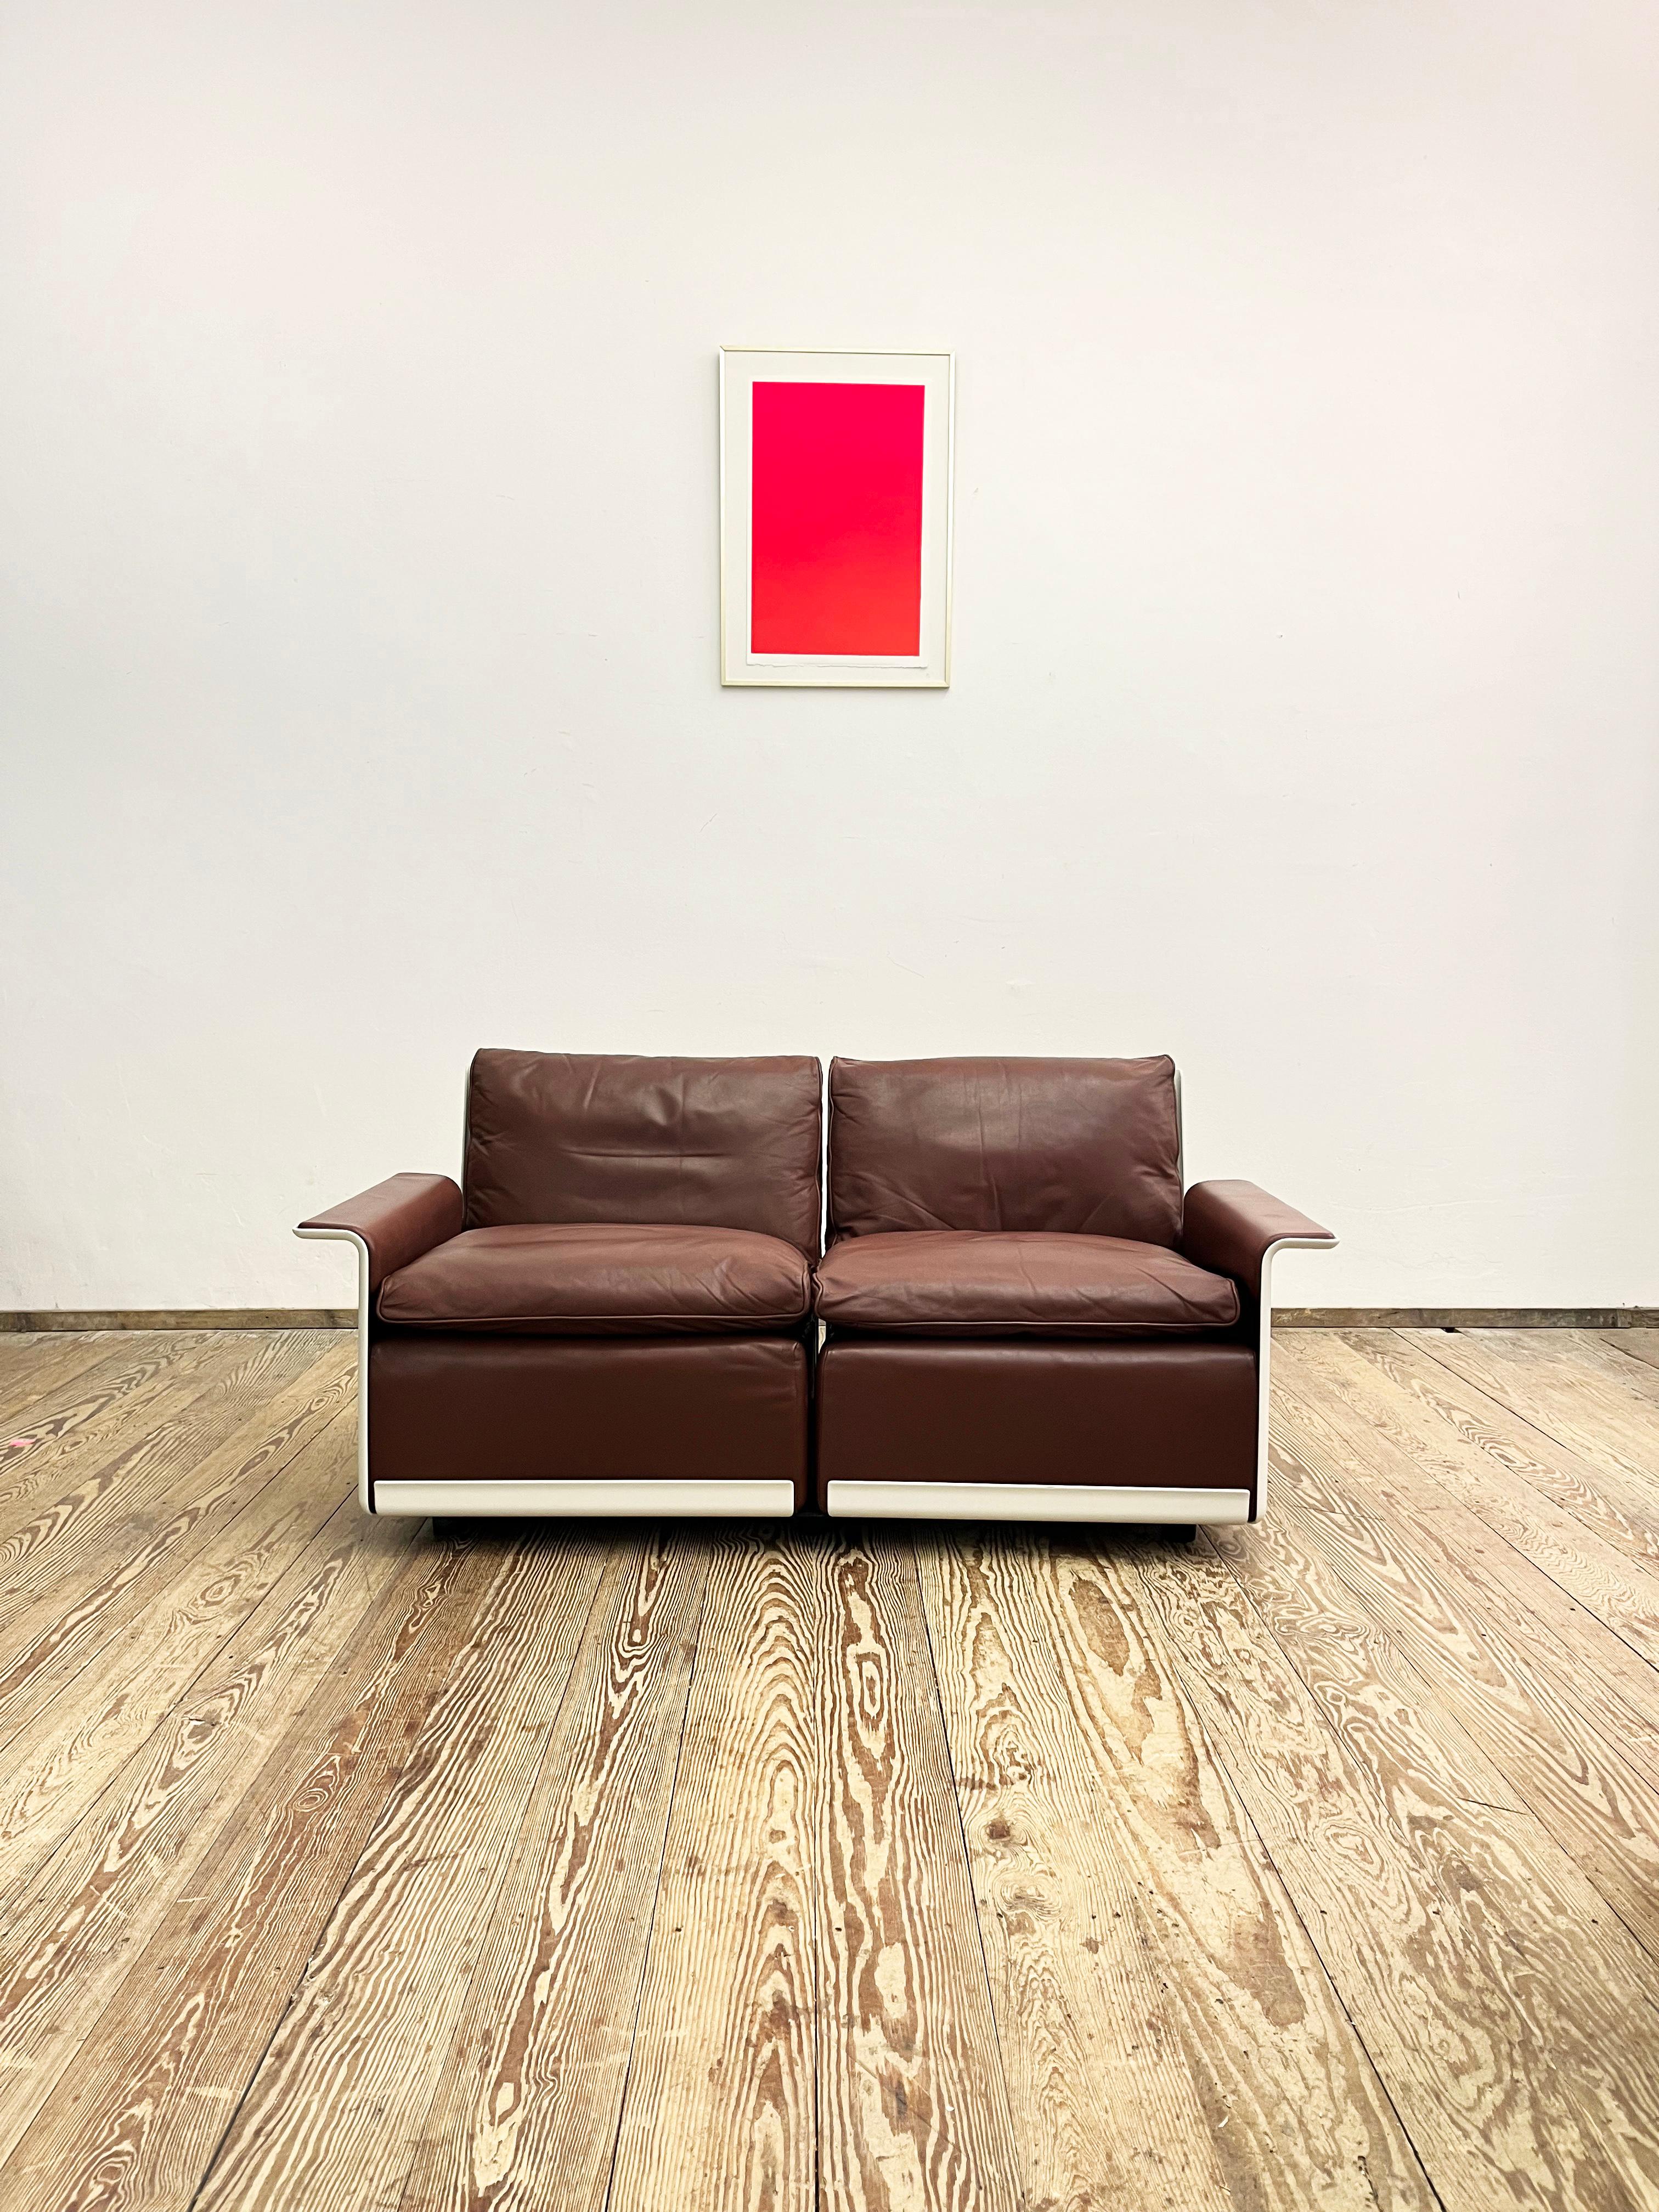 Dimensions ca. 153 x 70 x 65 x 43 cm (WxDxHxSH)

This shapely and comfortable sofa was designed by German Designer Dieter Rams for Vitsoe in the 1960s in Germany. The 620 series is a system of furniture parts that can be used to create sofas and